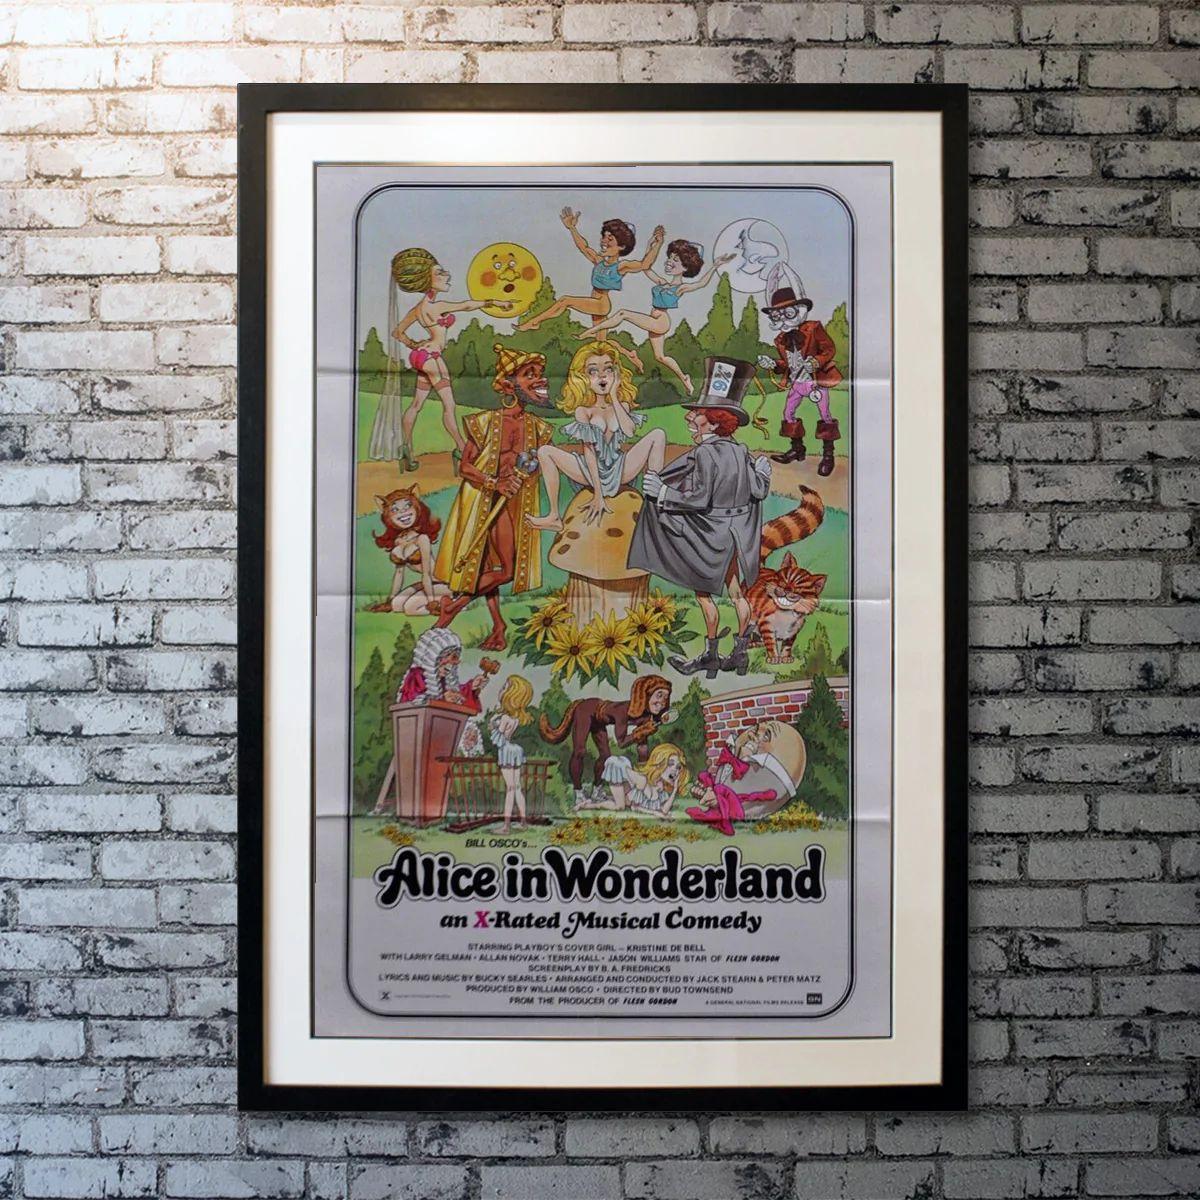 Alice In Wonderland: An X-Rated Musical Fantasy, Unframed Poster, 1976

Original One Sheet (27 X 41 Inches). Alice dreams of the White Rabbit, whom she follows into Wonderland, where she begins to experiment with her unexplored sexuality.

Year: